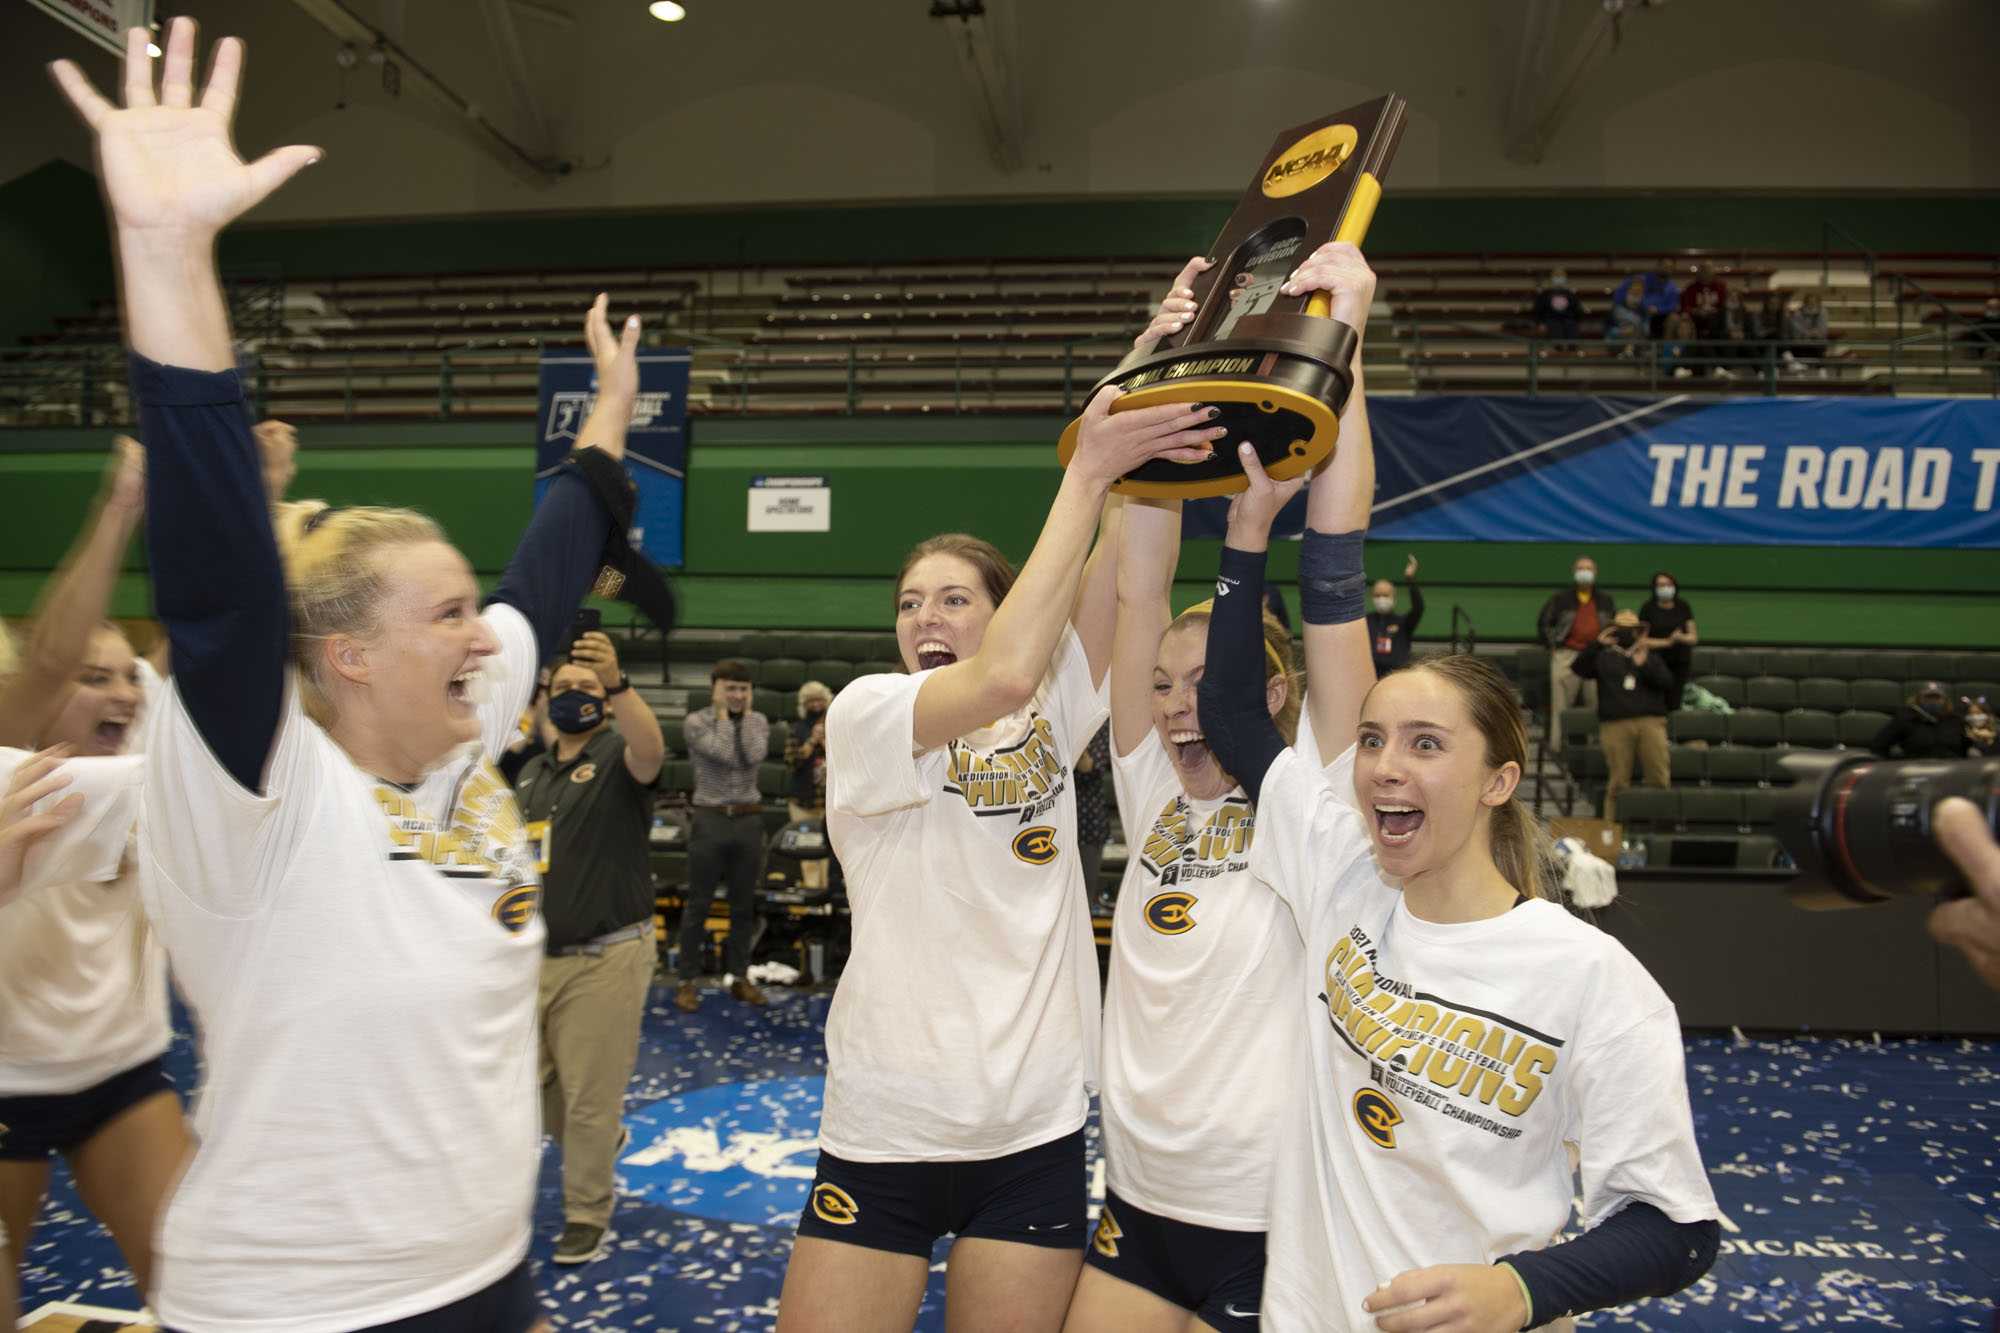 UW-Eau Claire women’s volleyball team wins Division III national championship